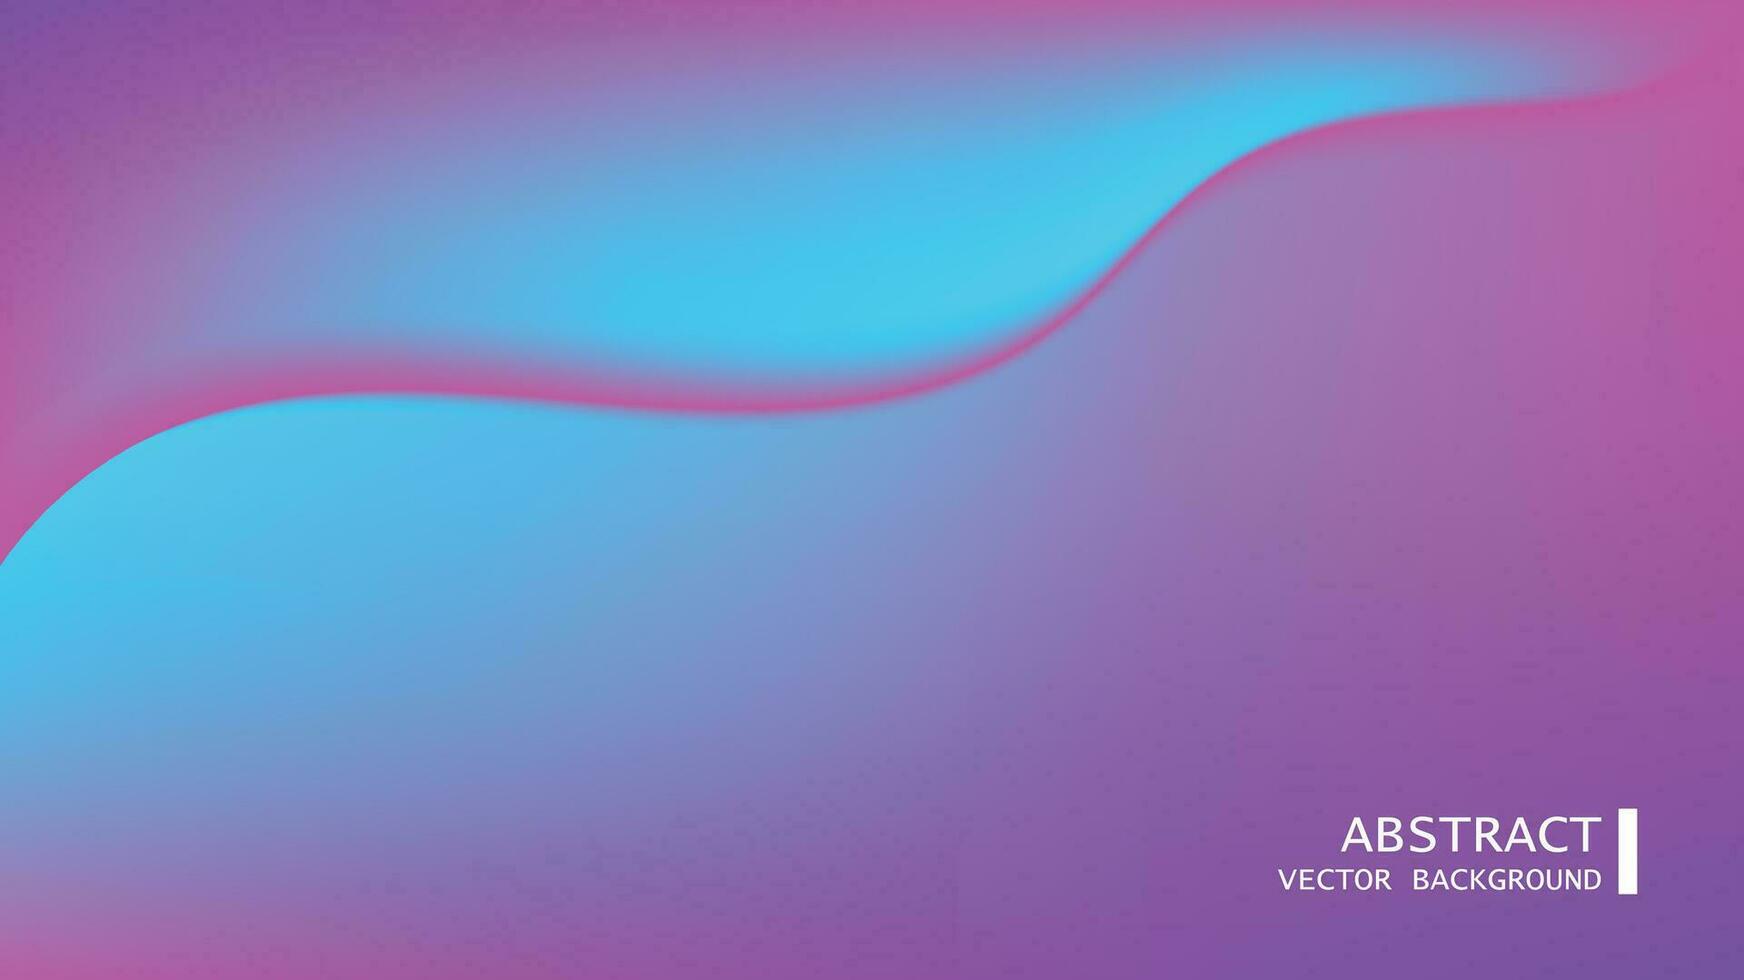 Abstract vector bg pastel colors pink purple light blue background